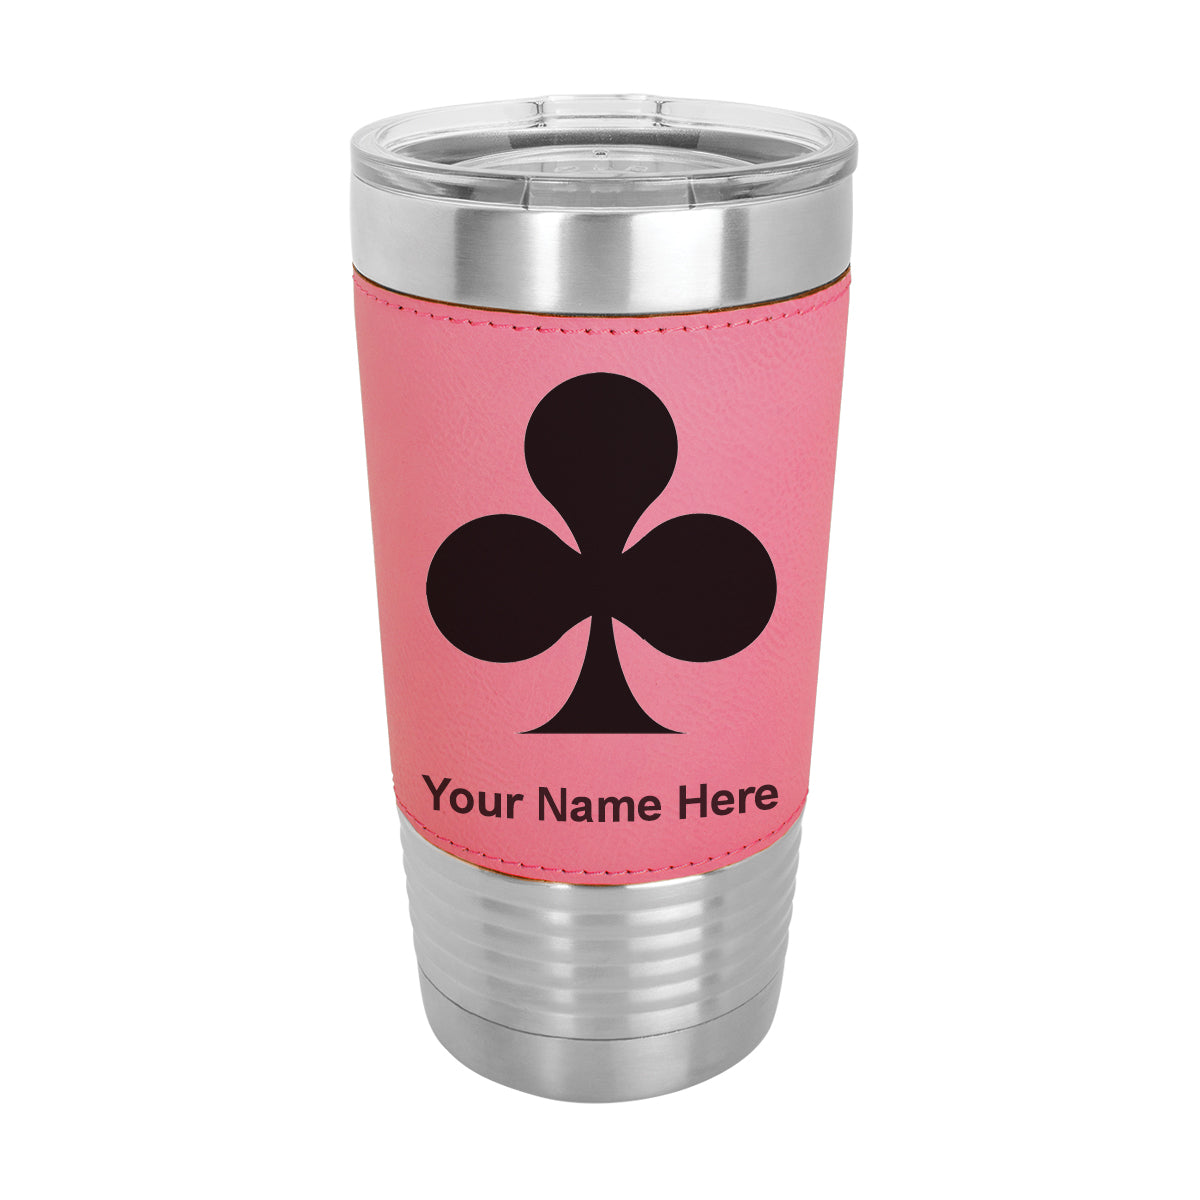 20oz Faux Leather Tumbler Mug, Poker Clubs, Personalized Engraving Included - LaserGram Custom Engraved Gifts